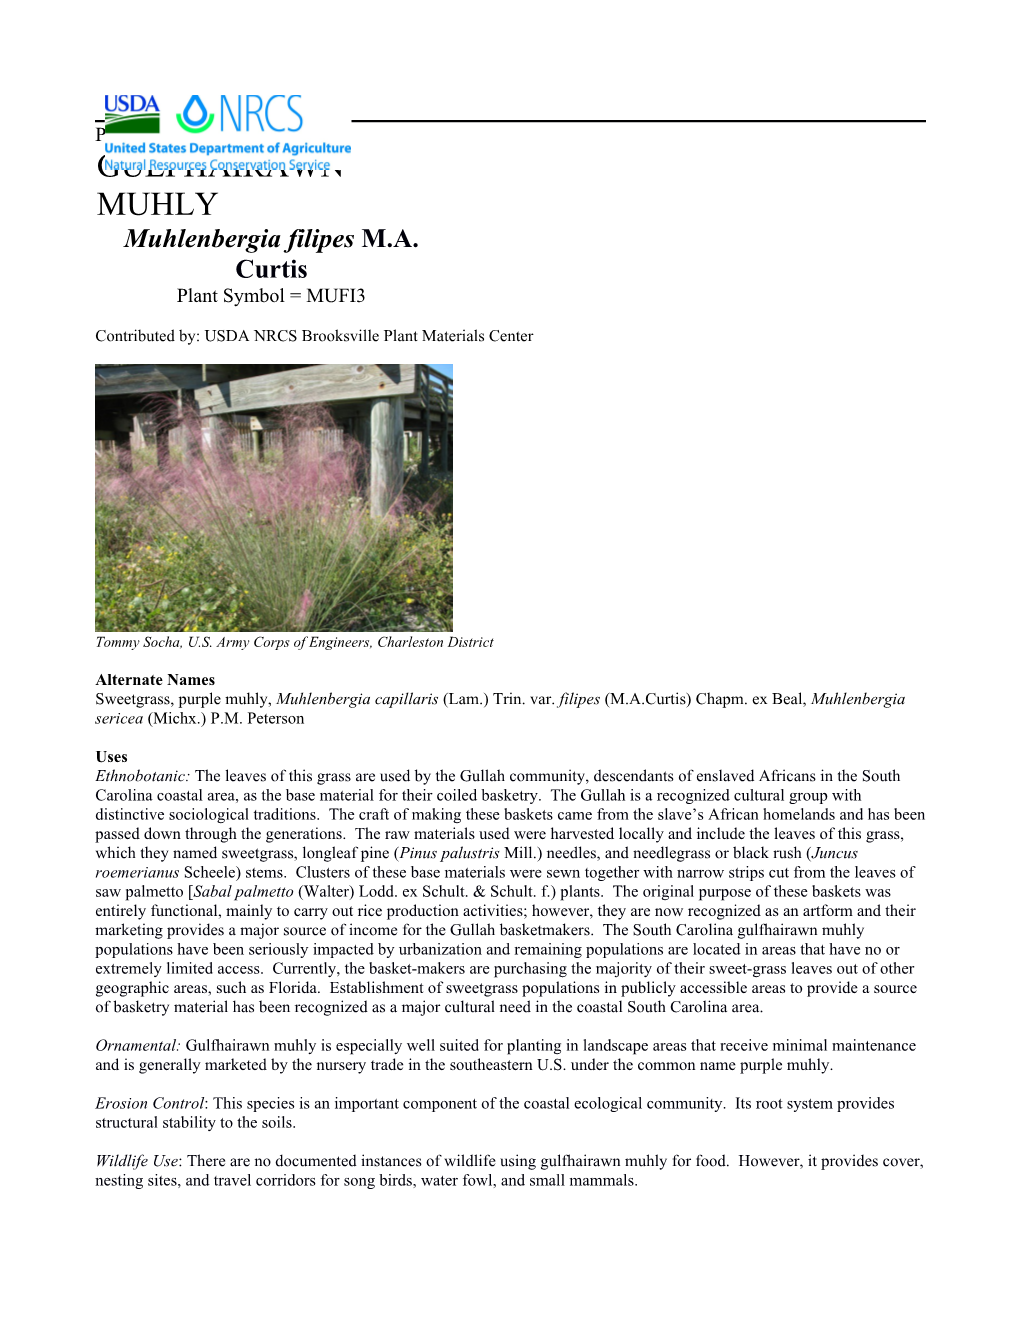 Plant Guide for Gulfhairawn Muhly